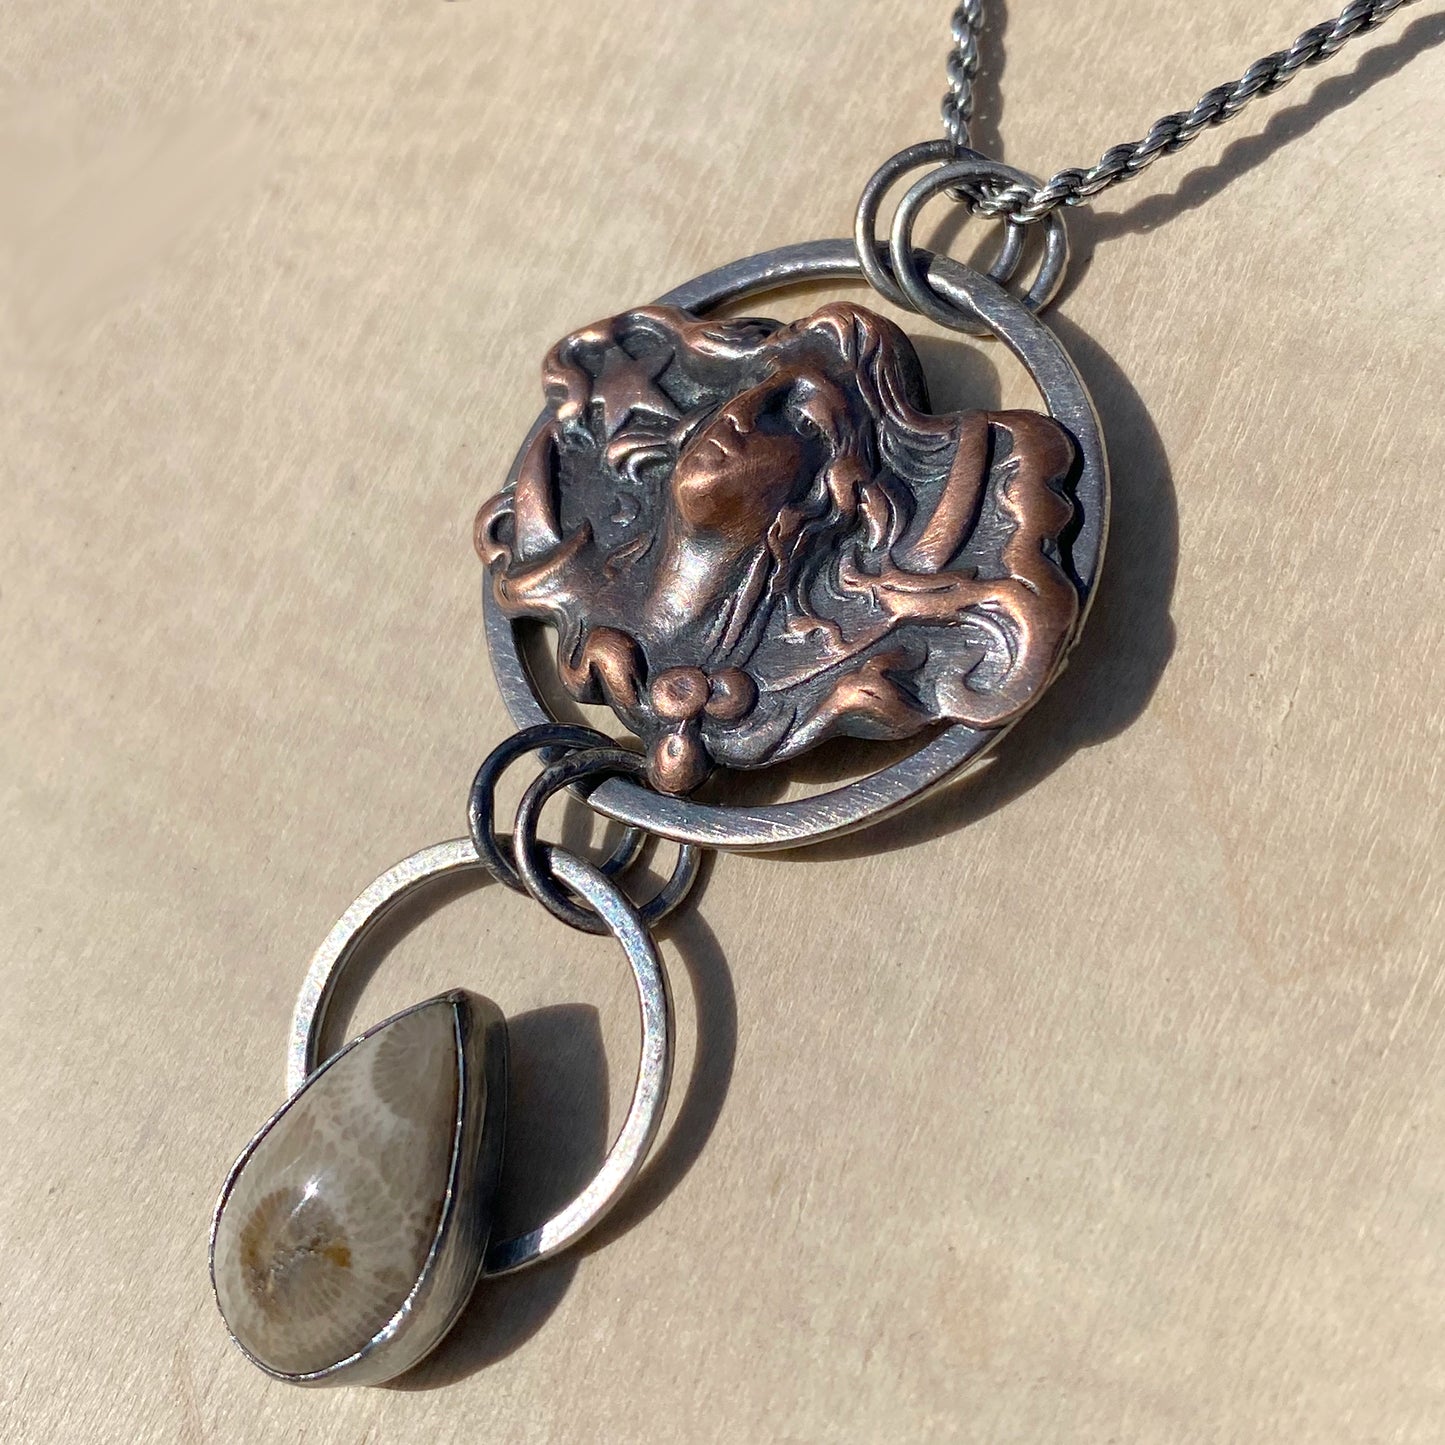 Petoskey Stone Artemis in the Sky Pendant Necklace - Stone Treasures by the Lake